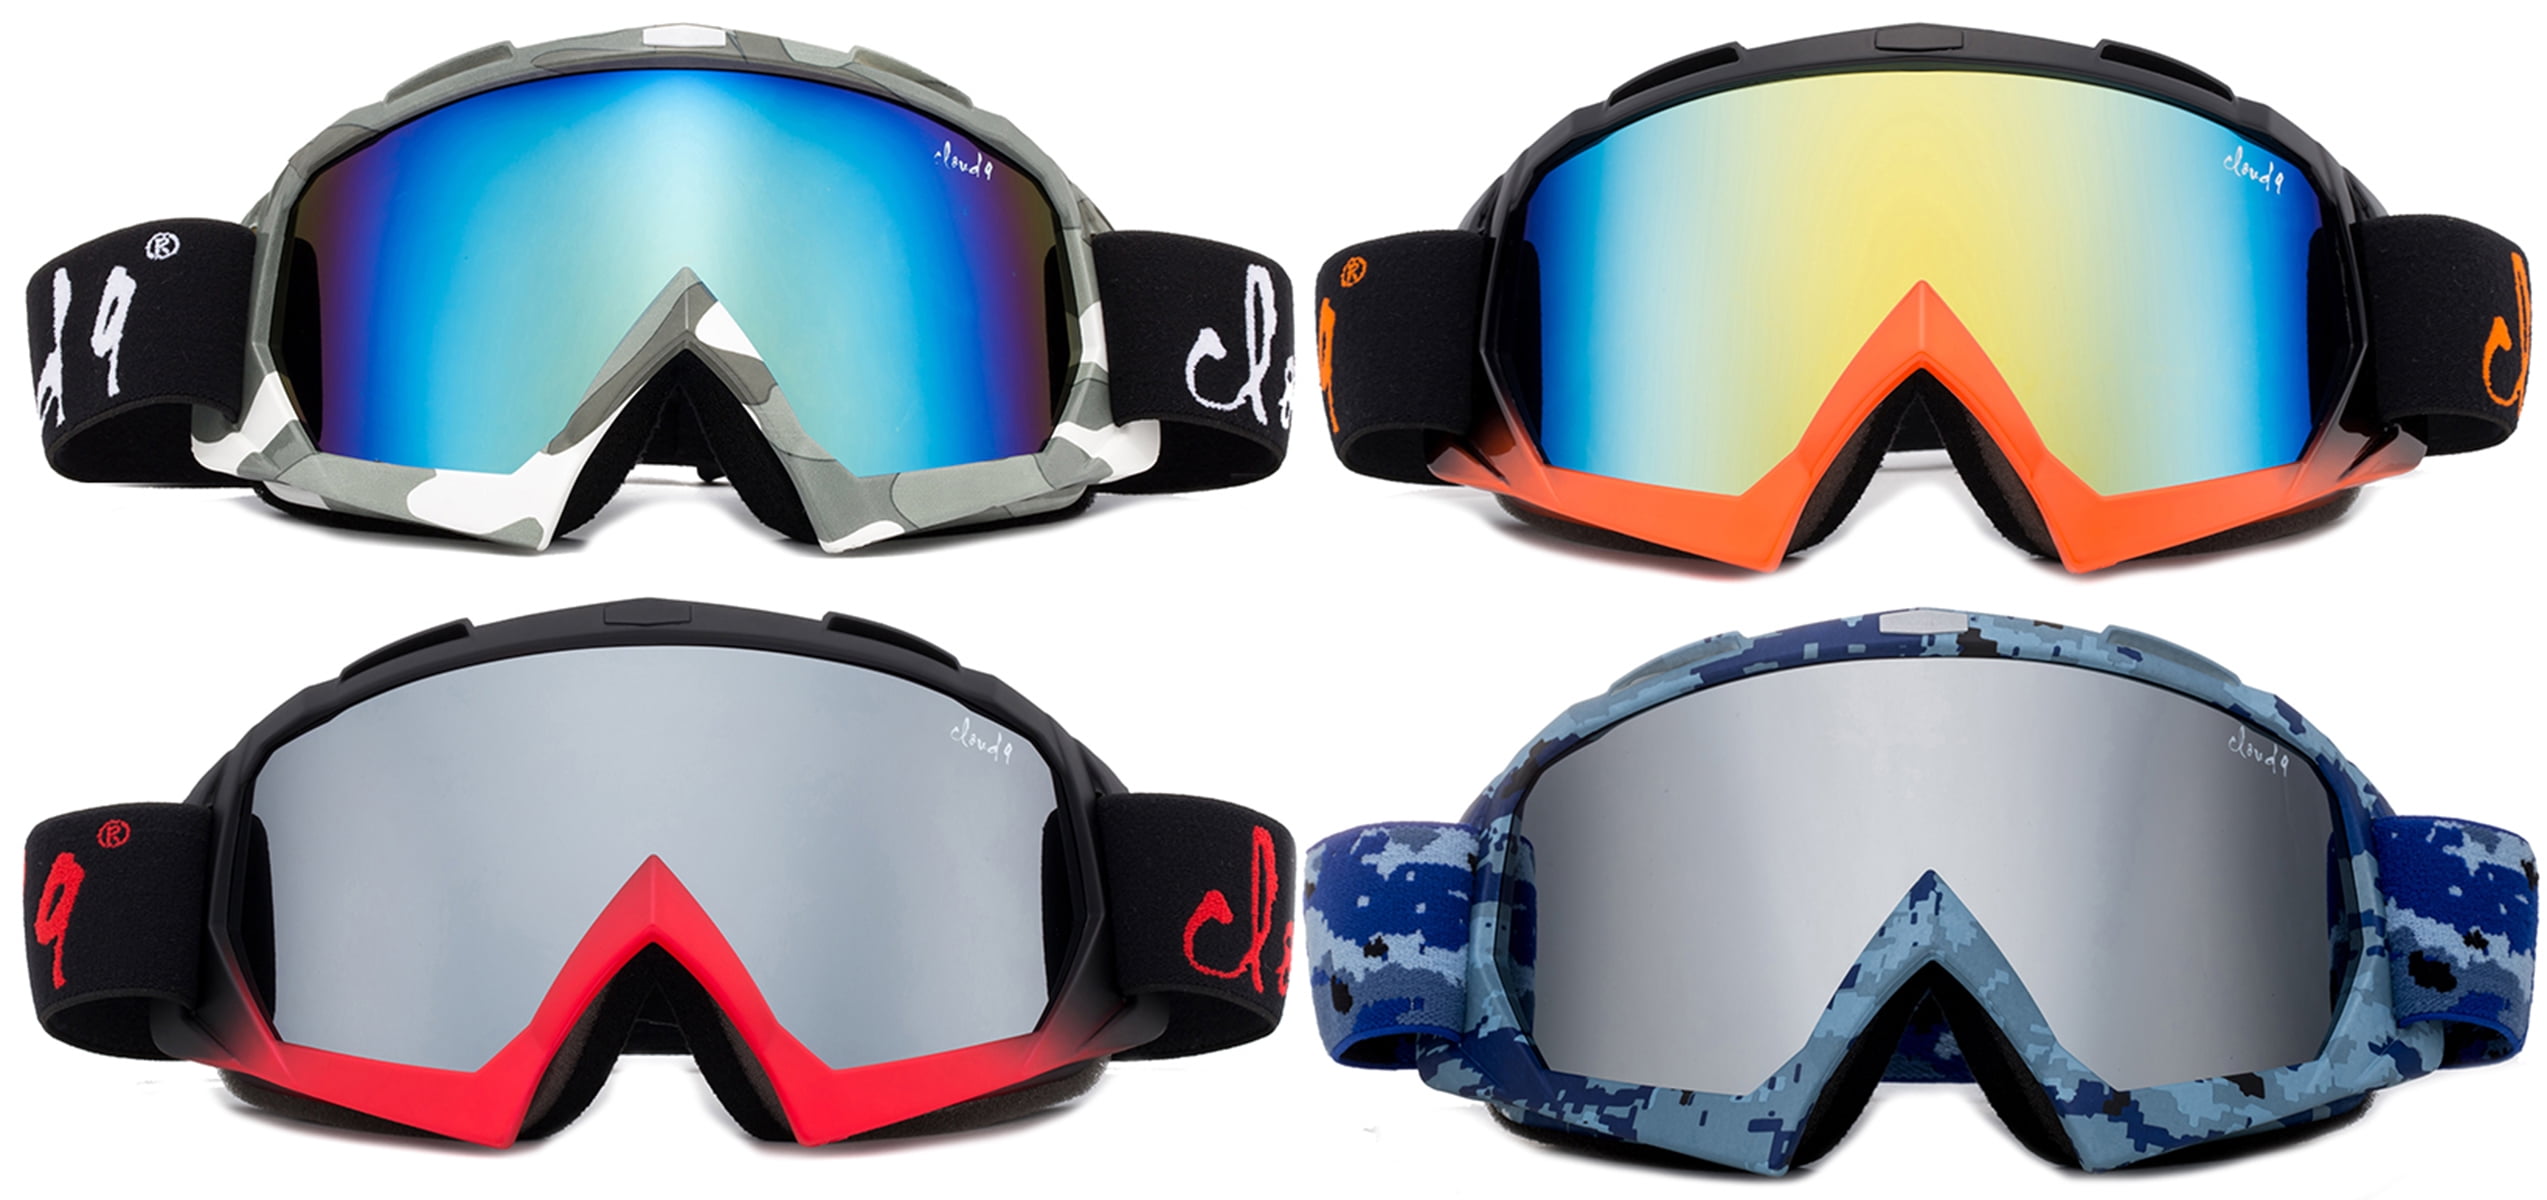 Cloud 9 Kids Snow Ski Goggles Youth Black Orange Flash Mirror Pouch Included 